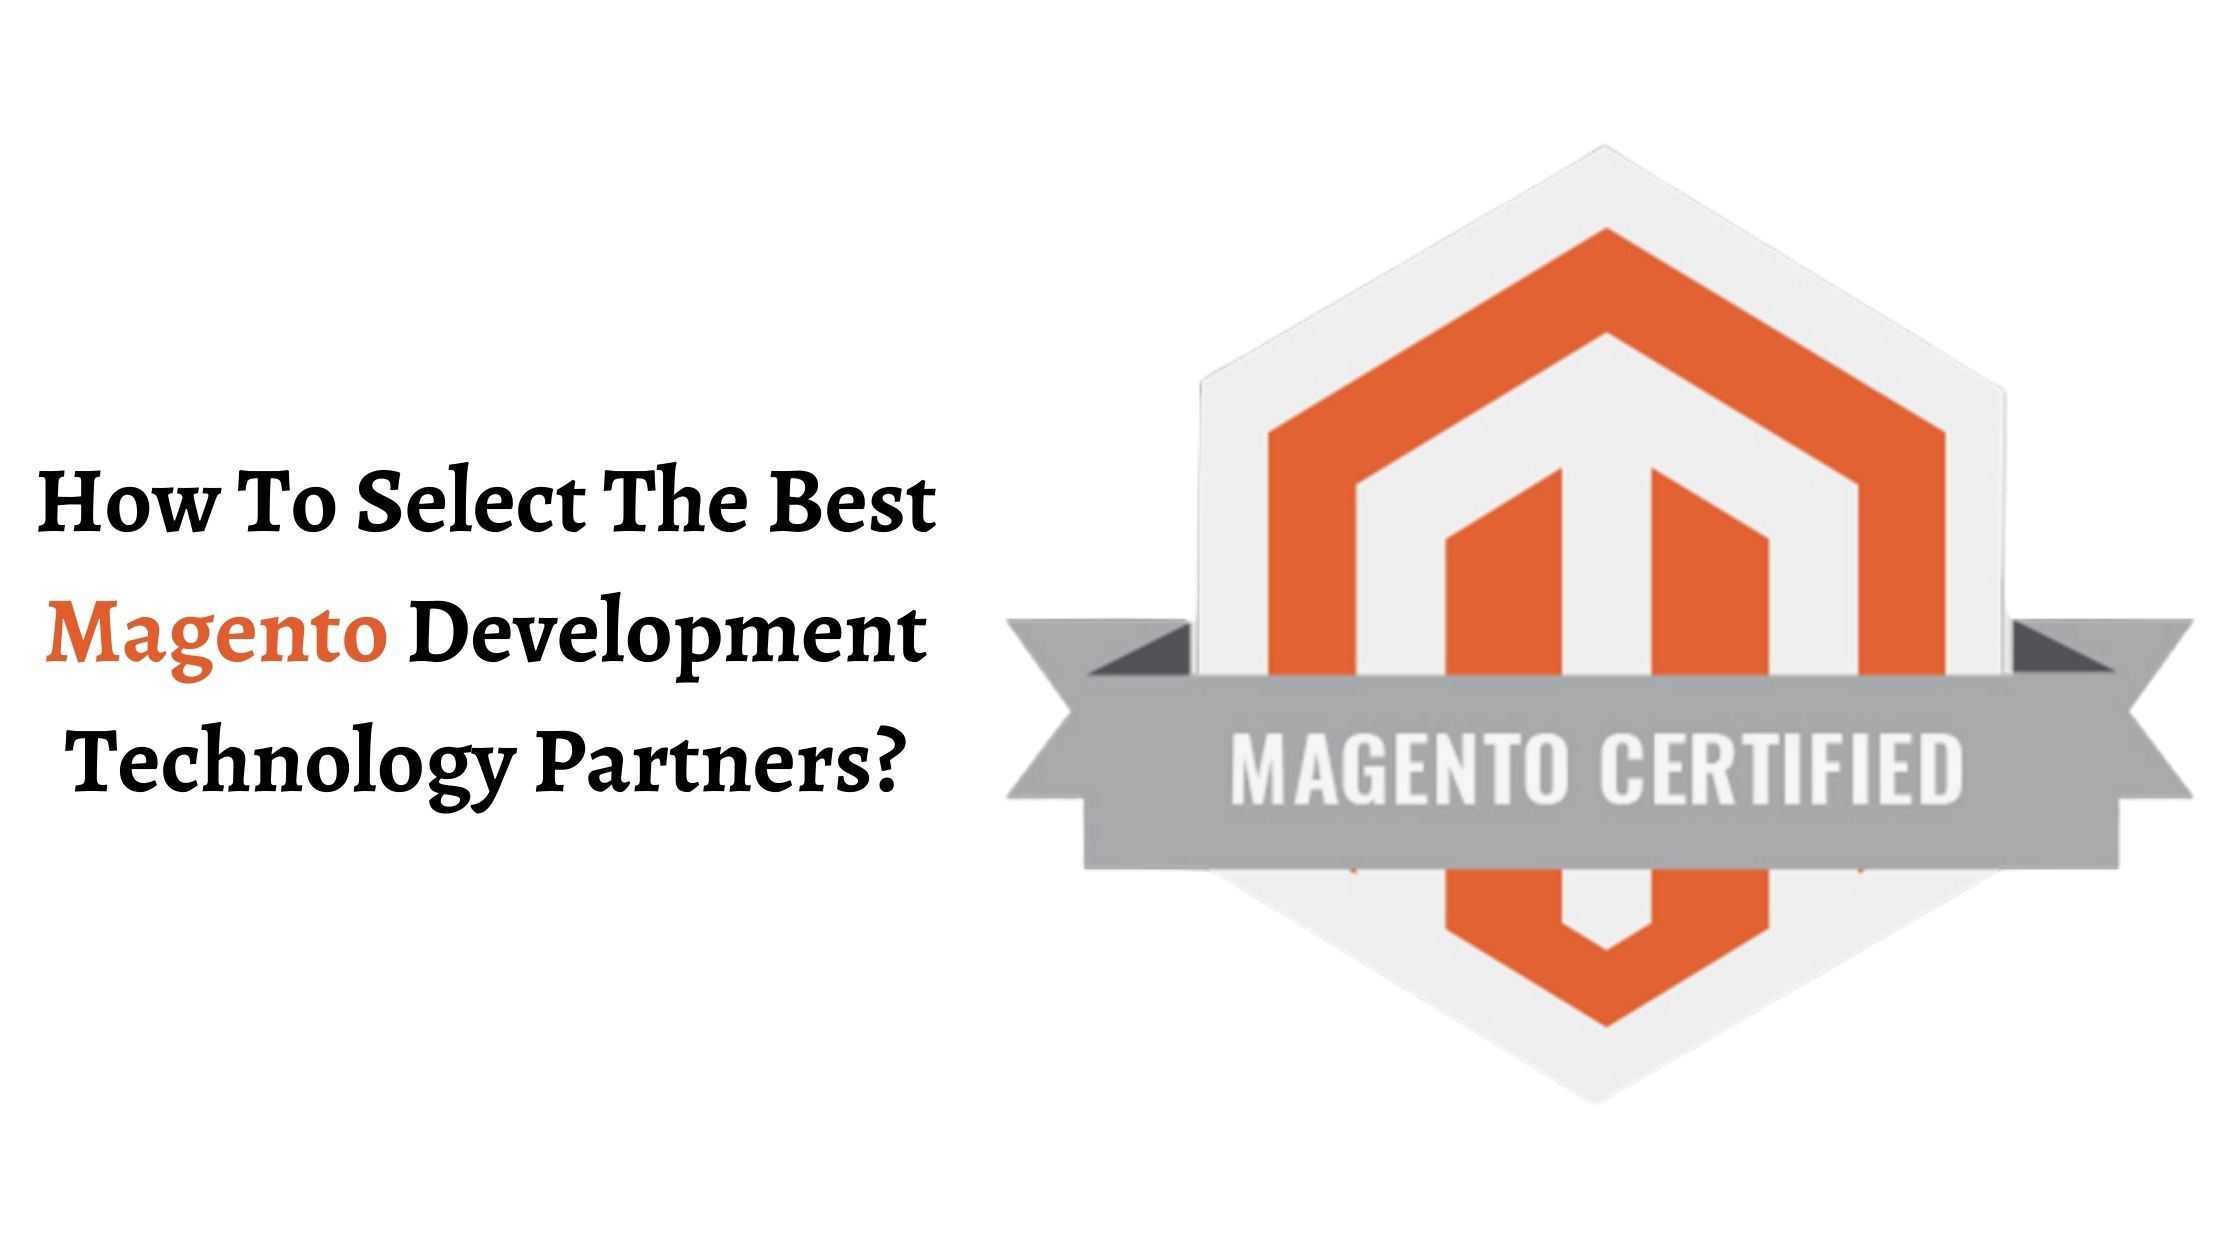 How To Select The Best Magento Development Technology Partners